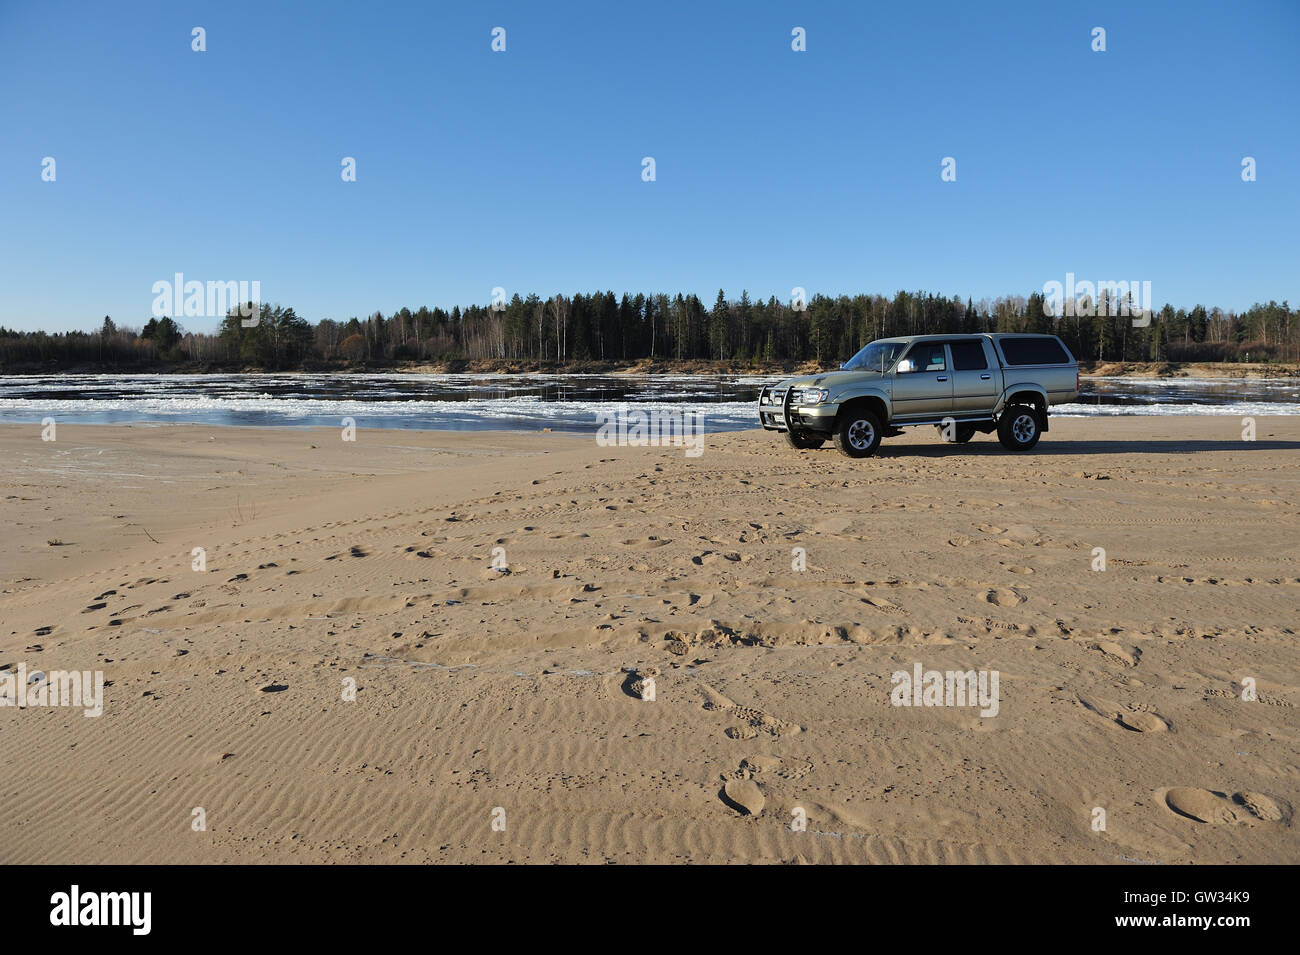 Great wall deer pickup on sandy beach of river. Stock Photo